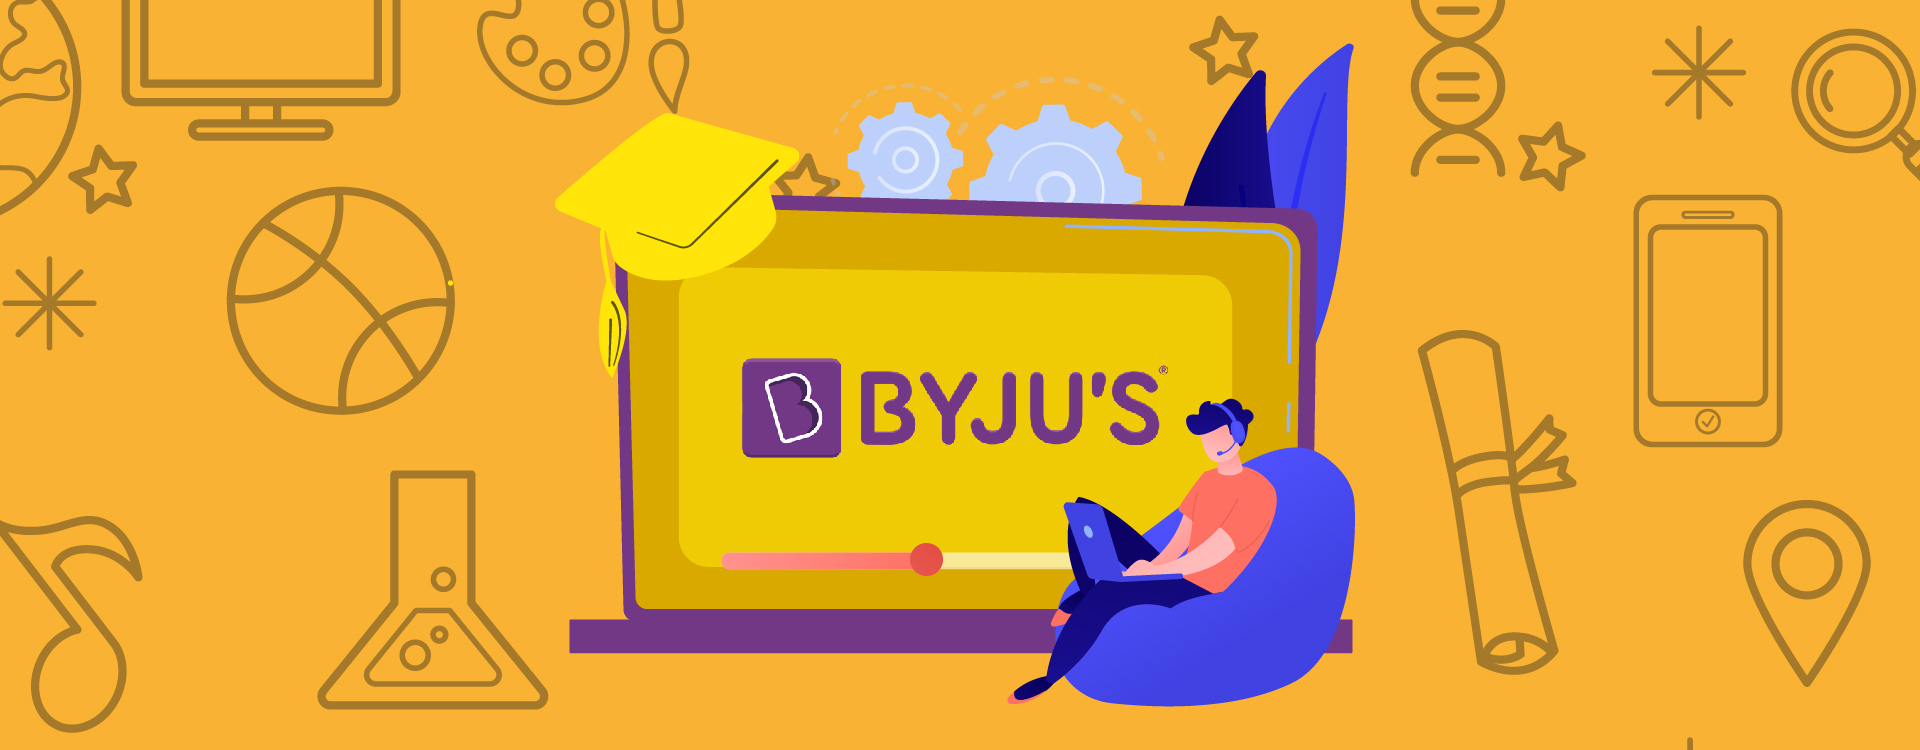 EdTech Unicorn BYJUS is all set for its third largest acquisition